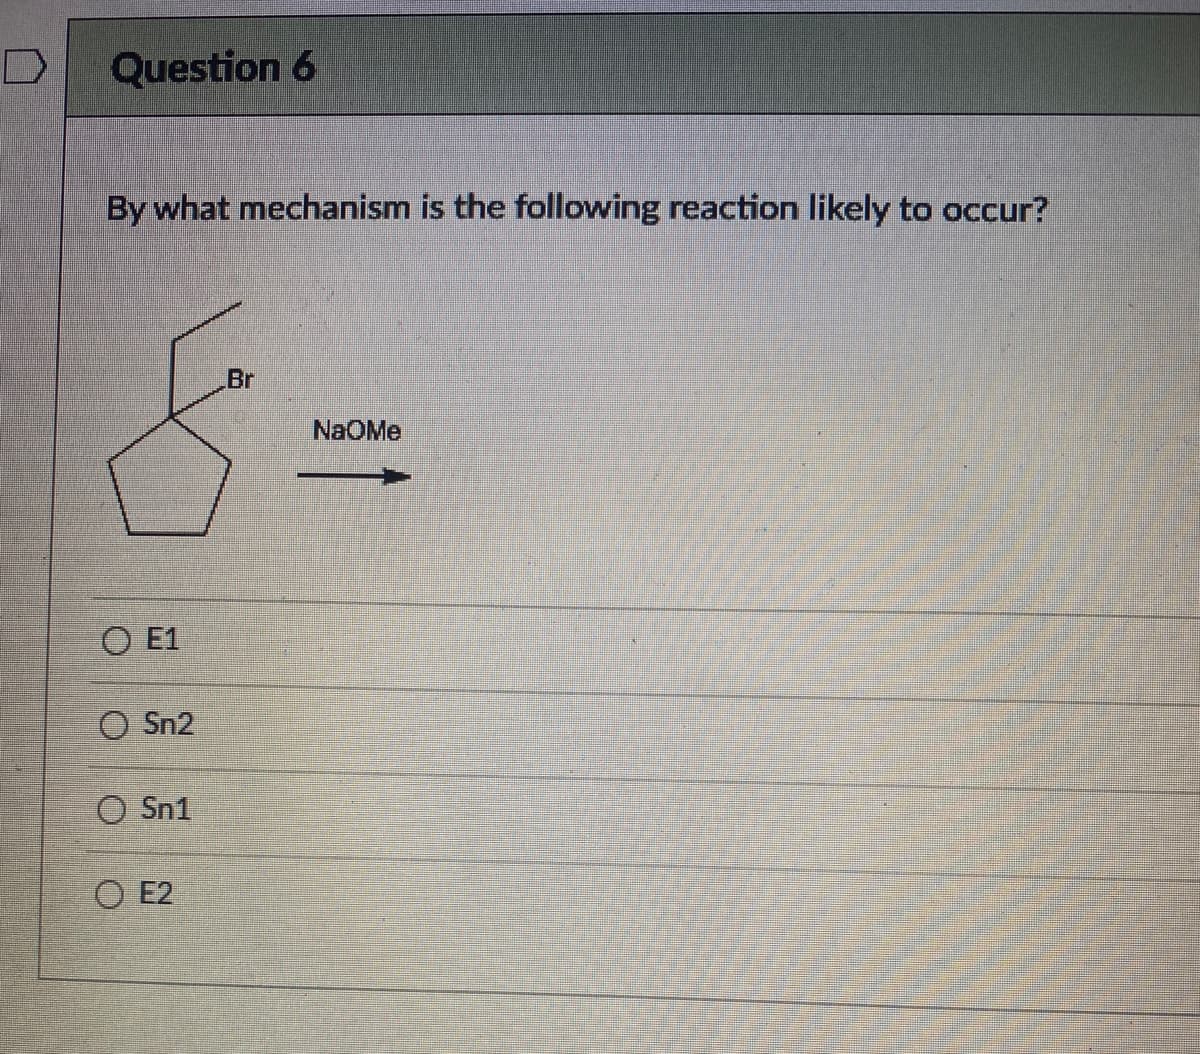 Question 6
By what mechanism is the following reaction likely to occur?
Br
NaOMe
O E1
O Sn2
O Sn1
O E2
